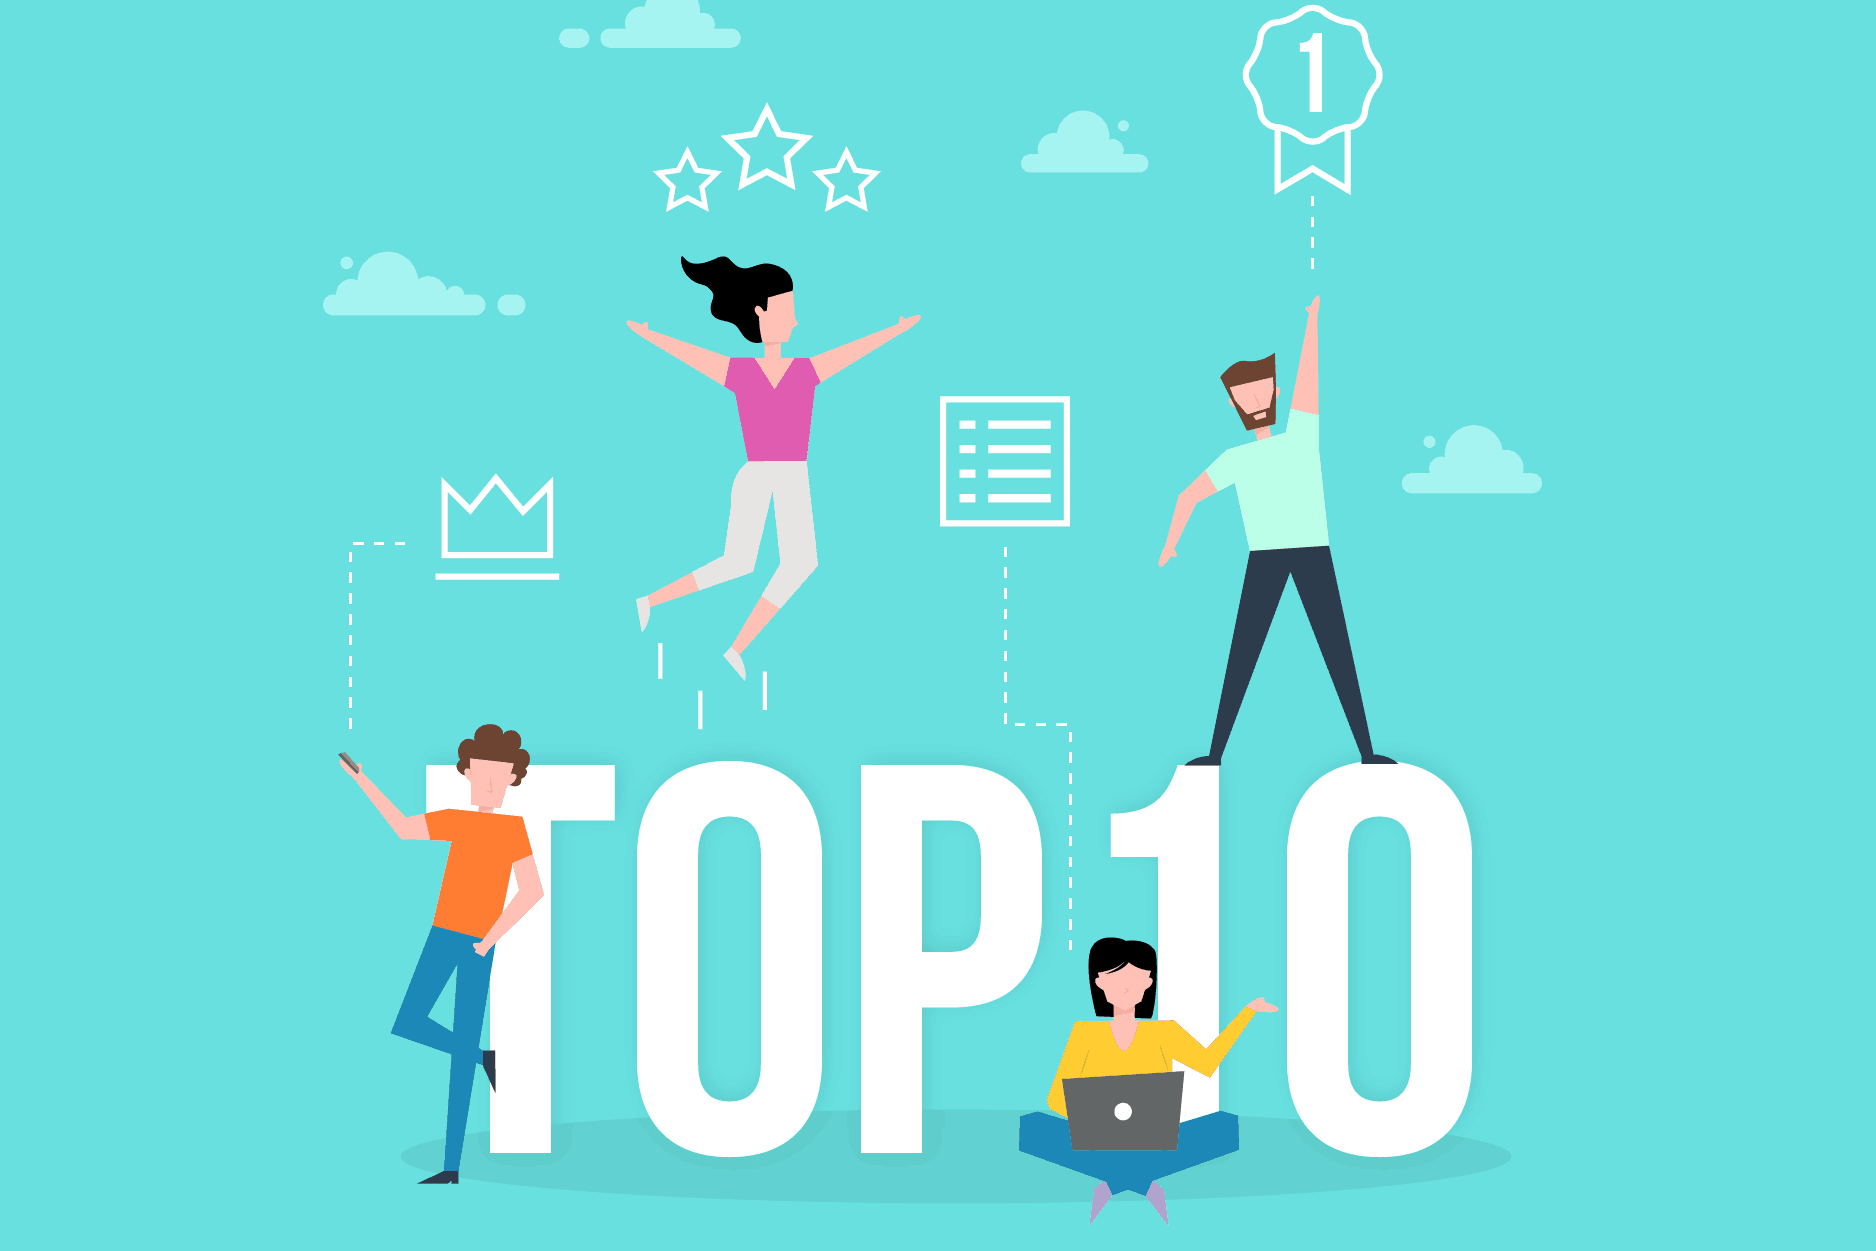 Top 10 Strategies, Tools, and Trends to Grow Your Practice in 2020